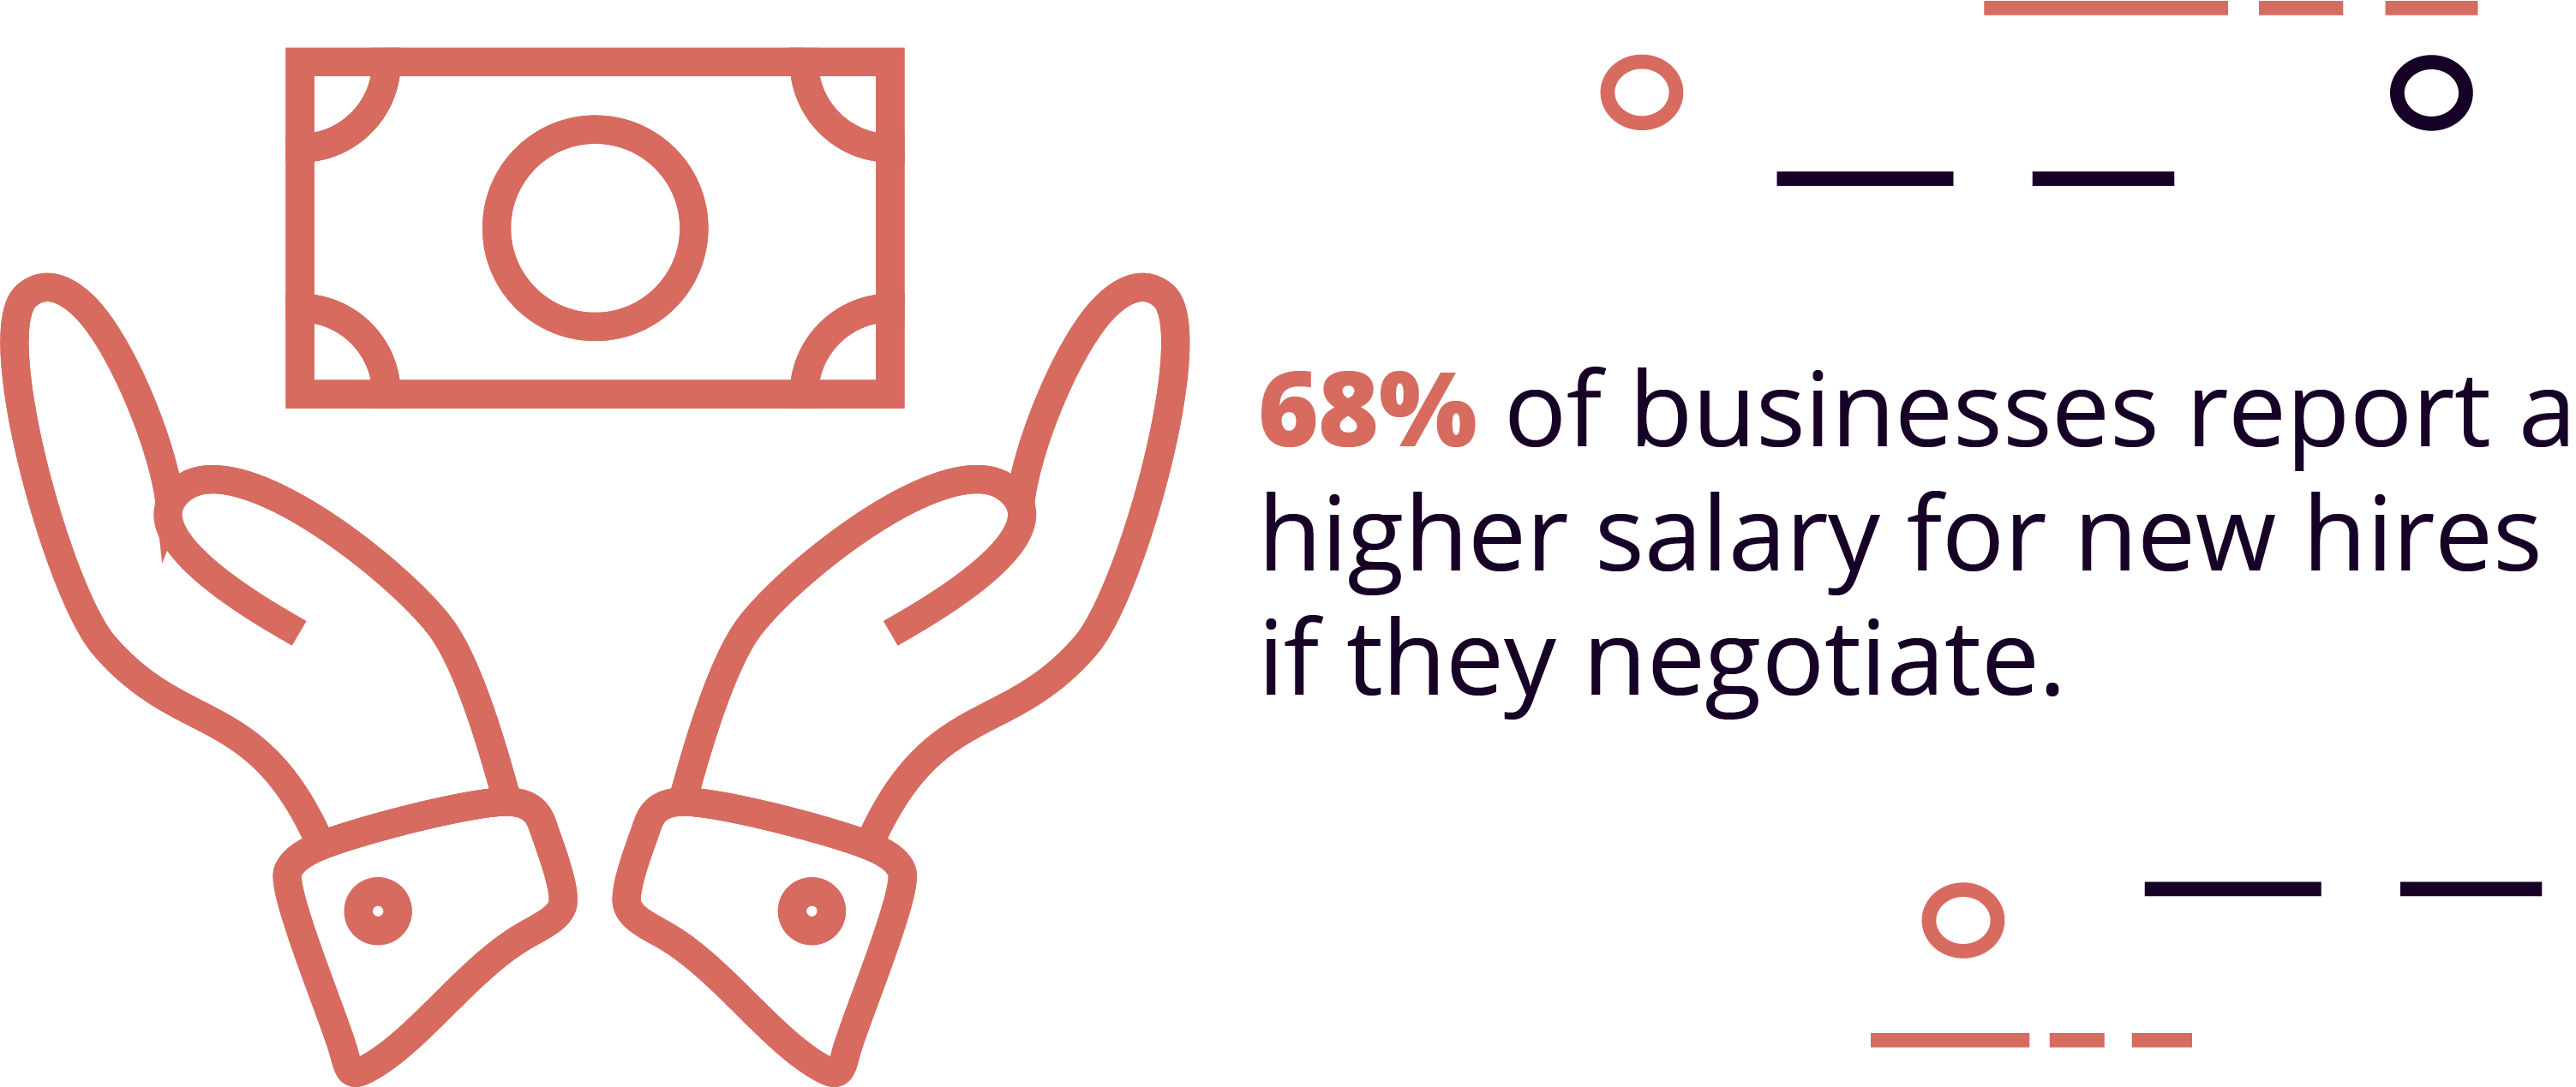 68% of Businesses Report Higher Salaries for New Hires Due to Salary Negotiation